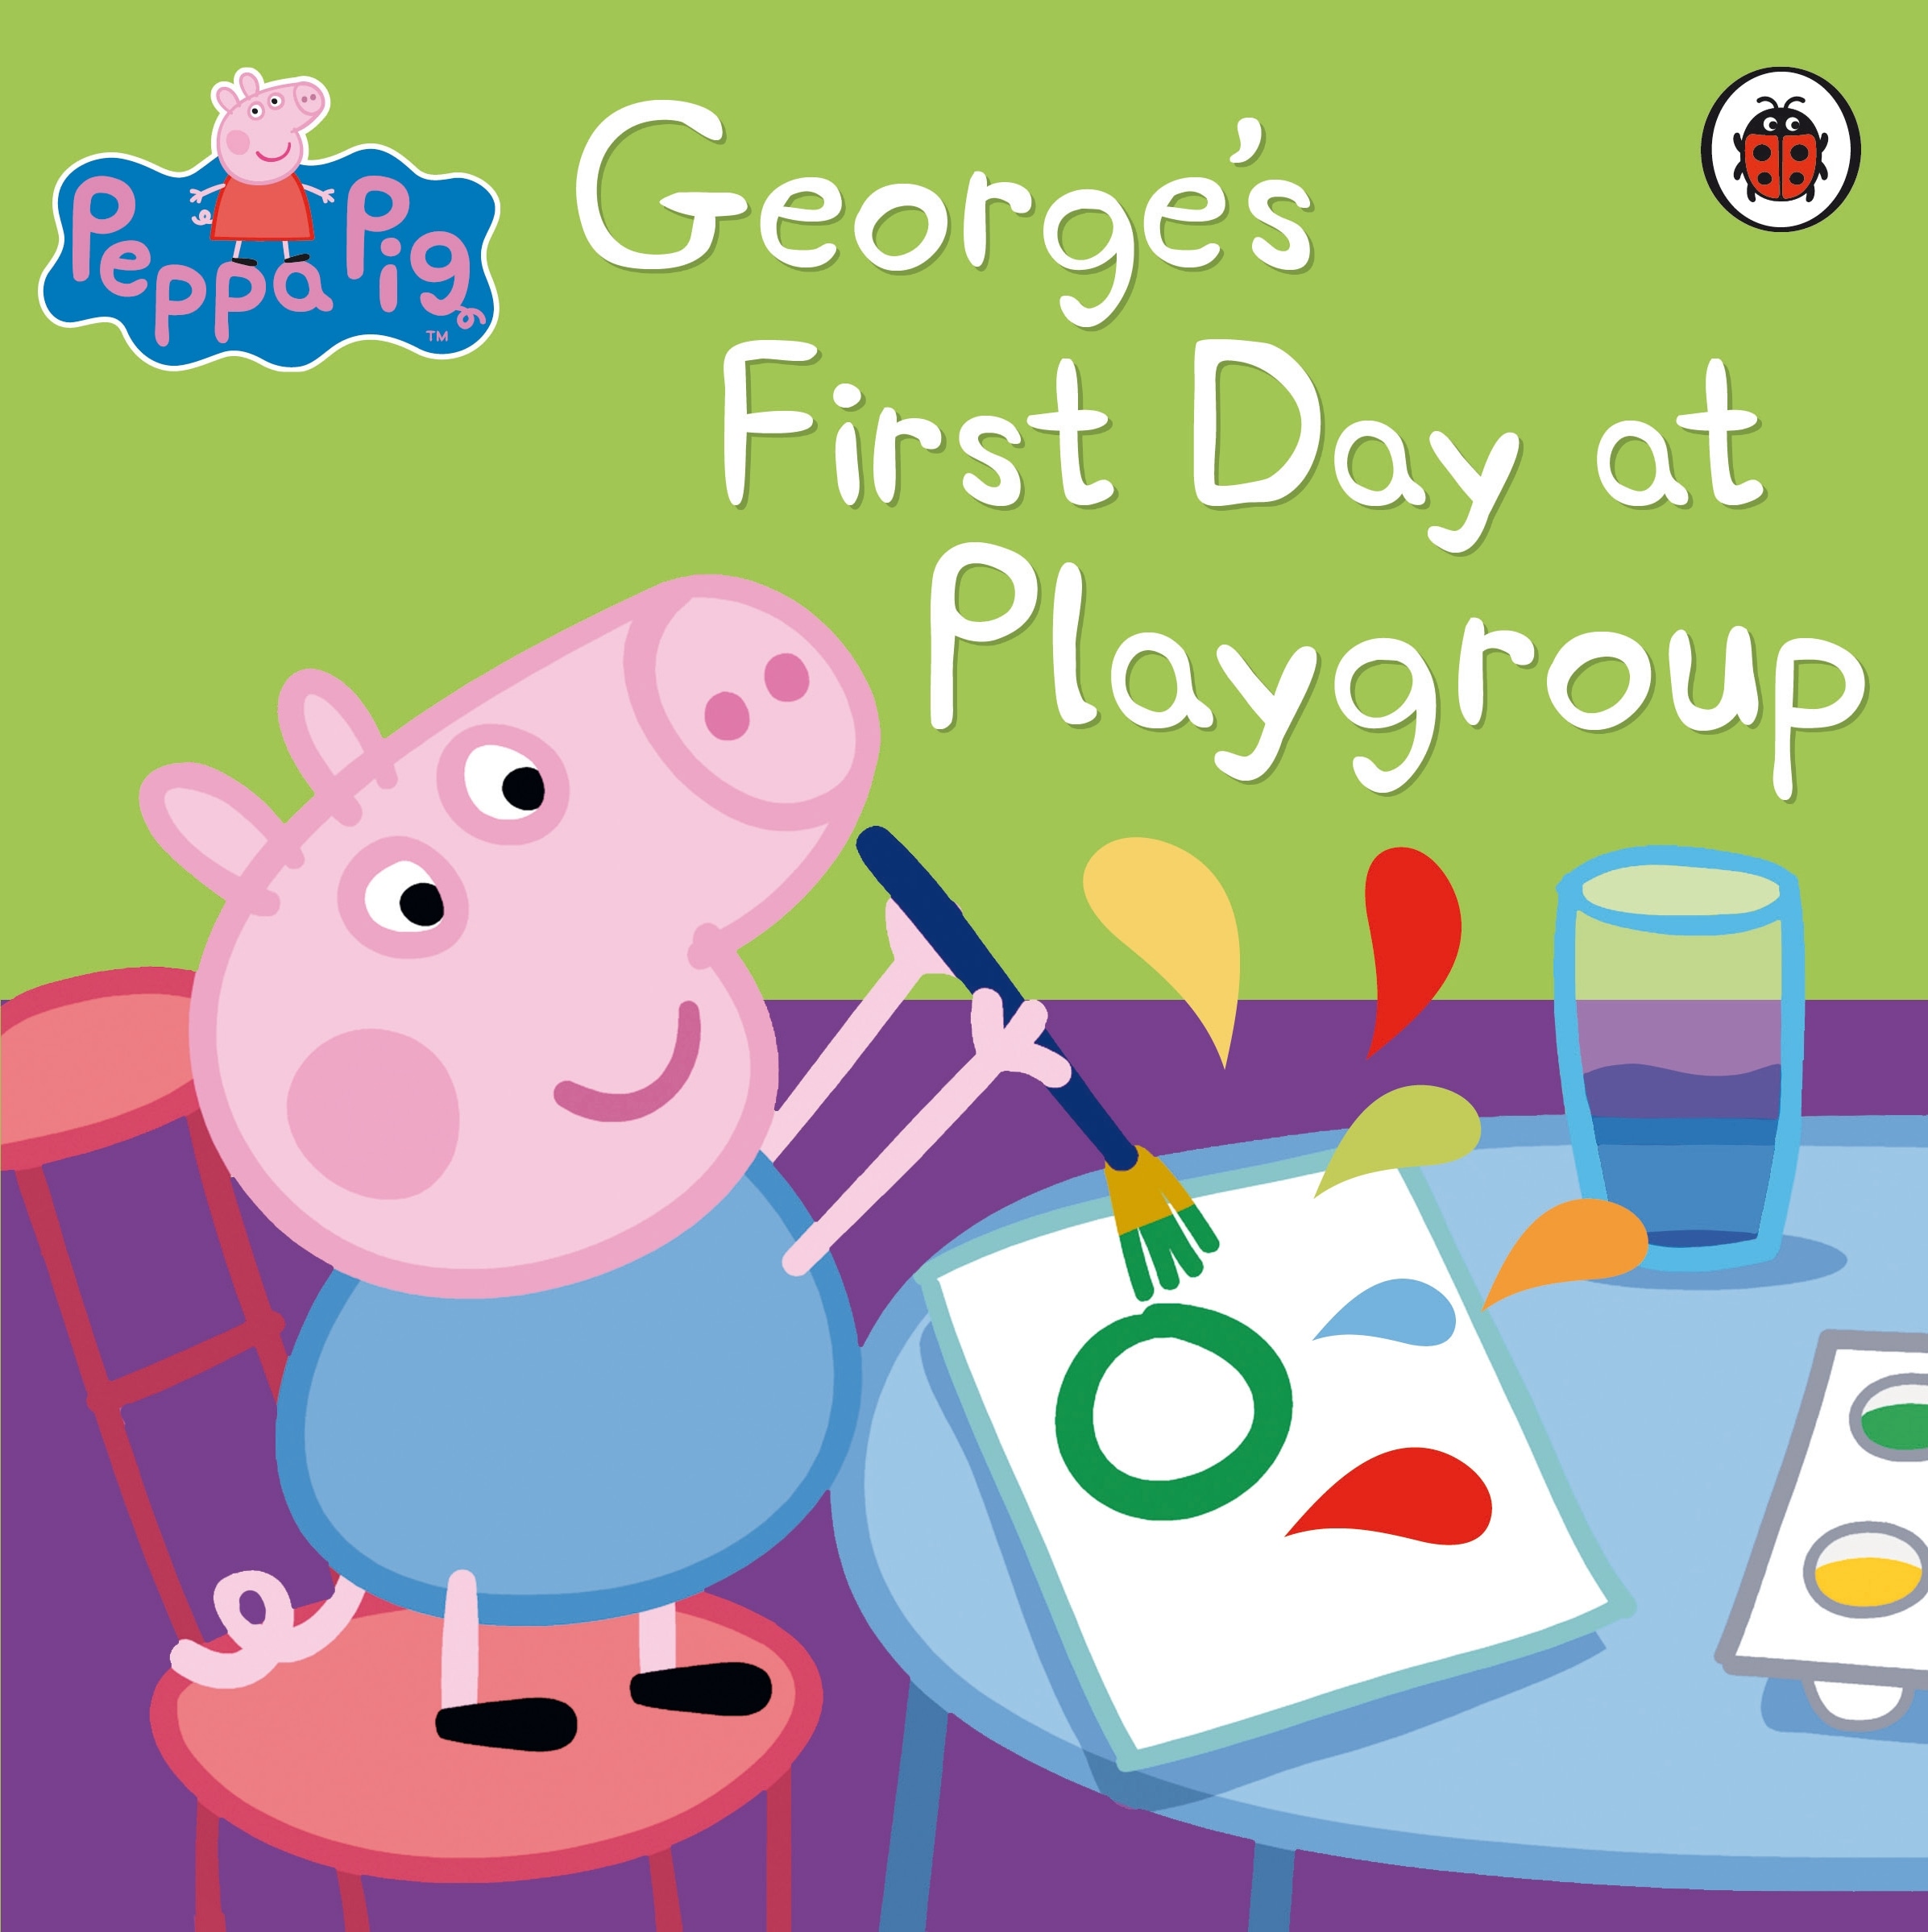 Book “Peppa Pig: George's First Day at Playgroup” by Peppa Pig — May 5, 2011